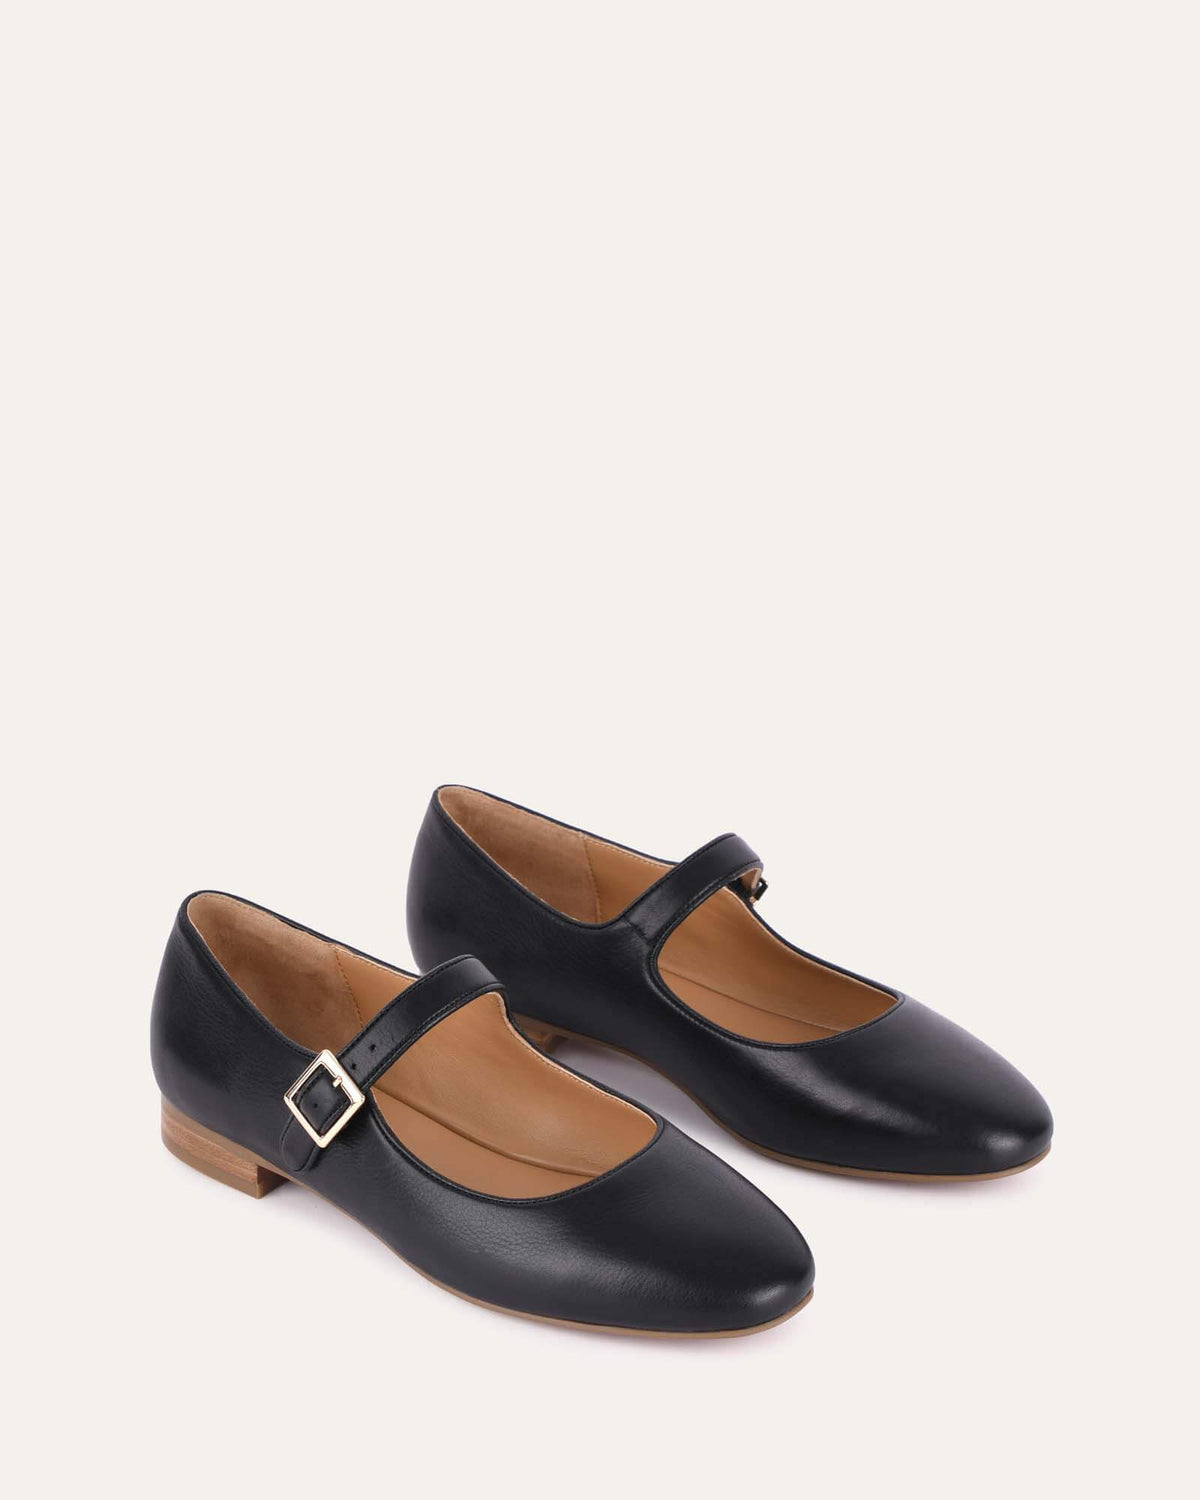 DARCY CASUAL FLATS BLACK LEATHER